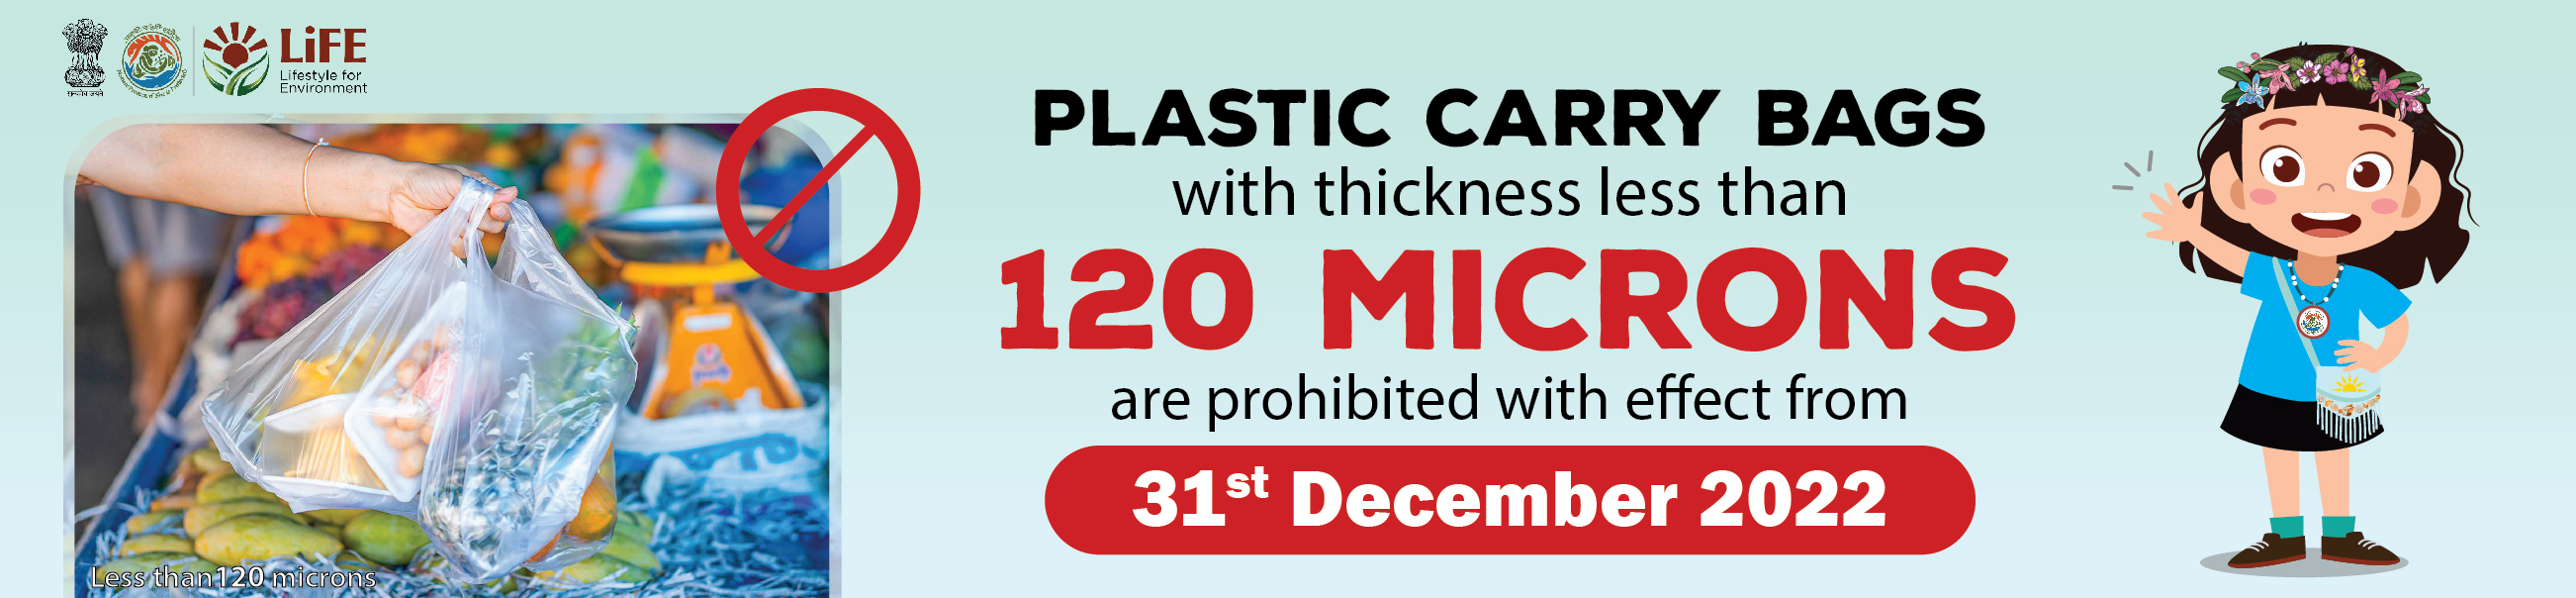 Banner-Plastic Carry bags with thickness less than 120 Micronsare prohibited with effect from 31-12-2022